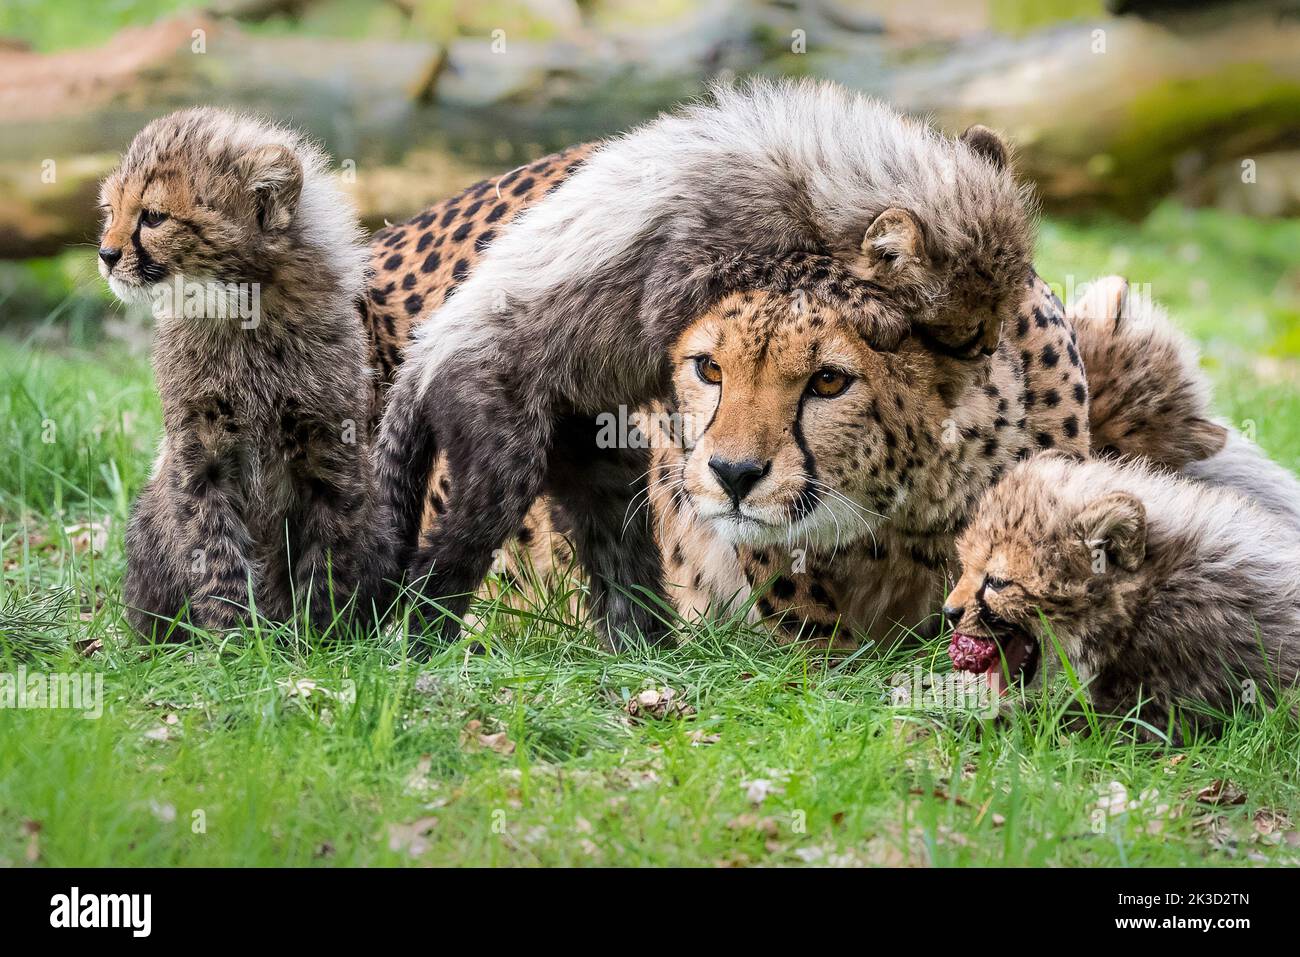 Cheetah with cubs Stock Photo